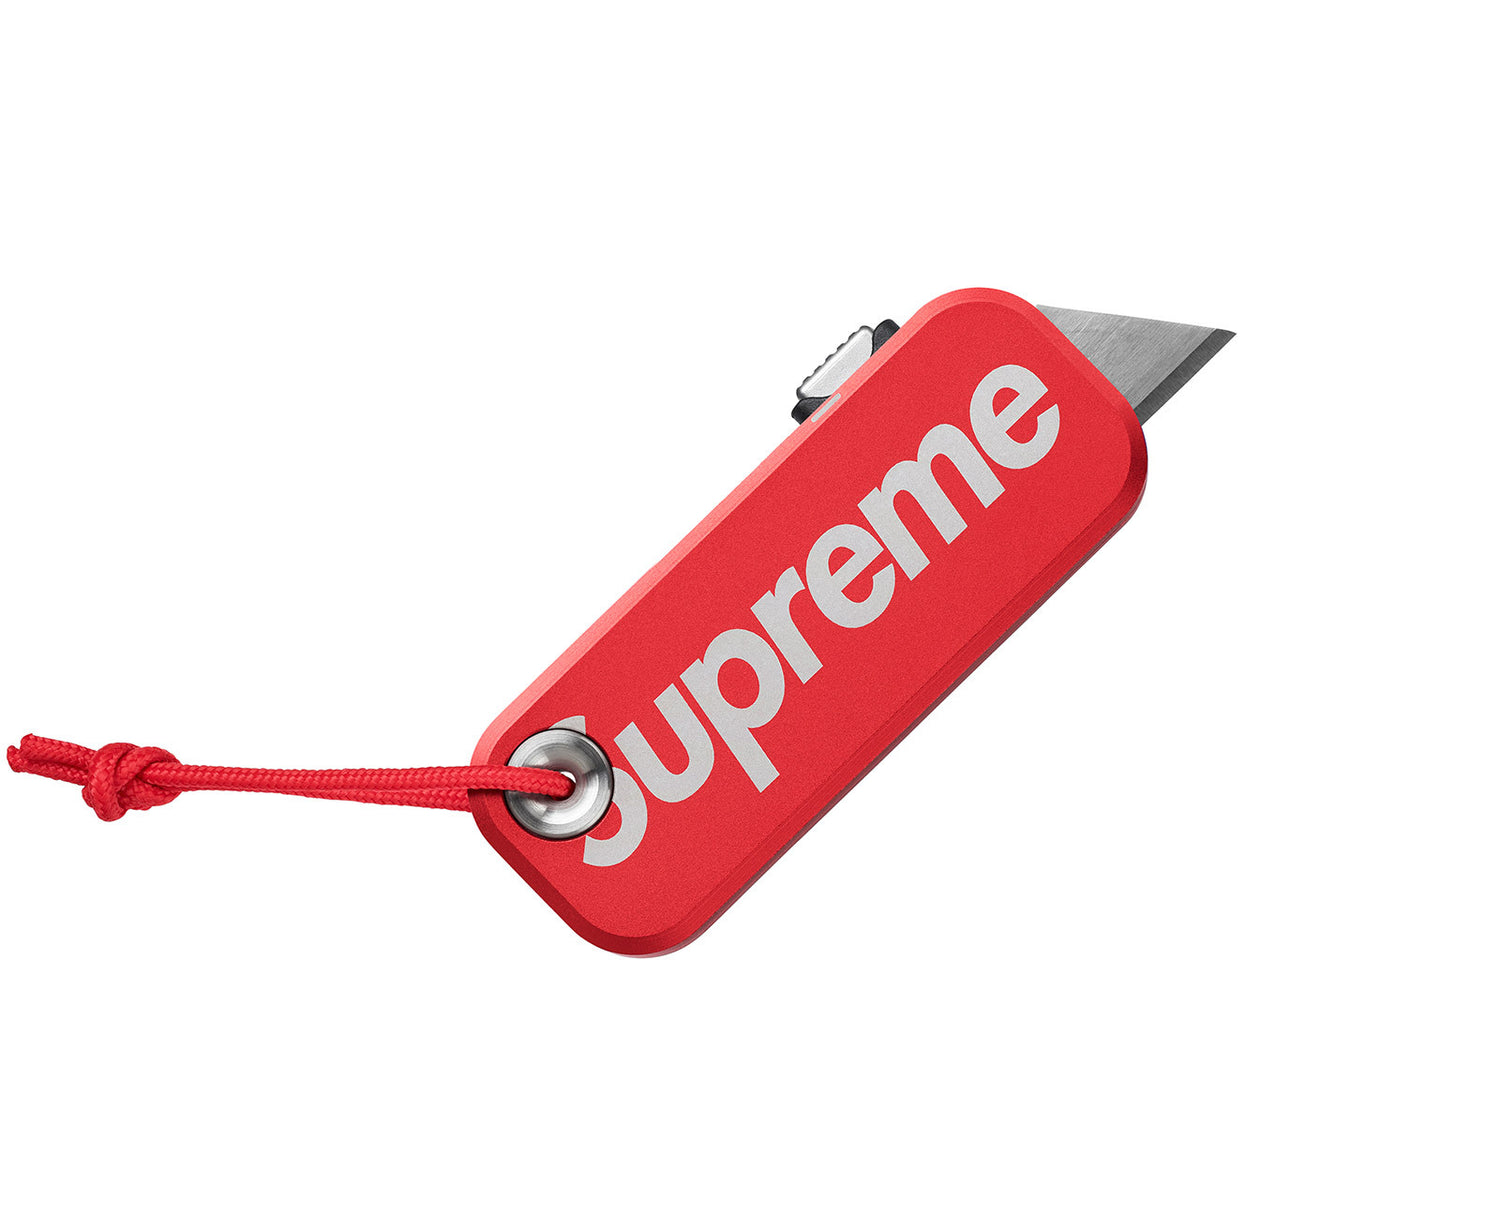 The Palmer Supreme knife with red case.